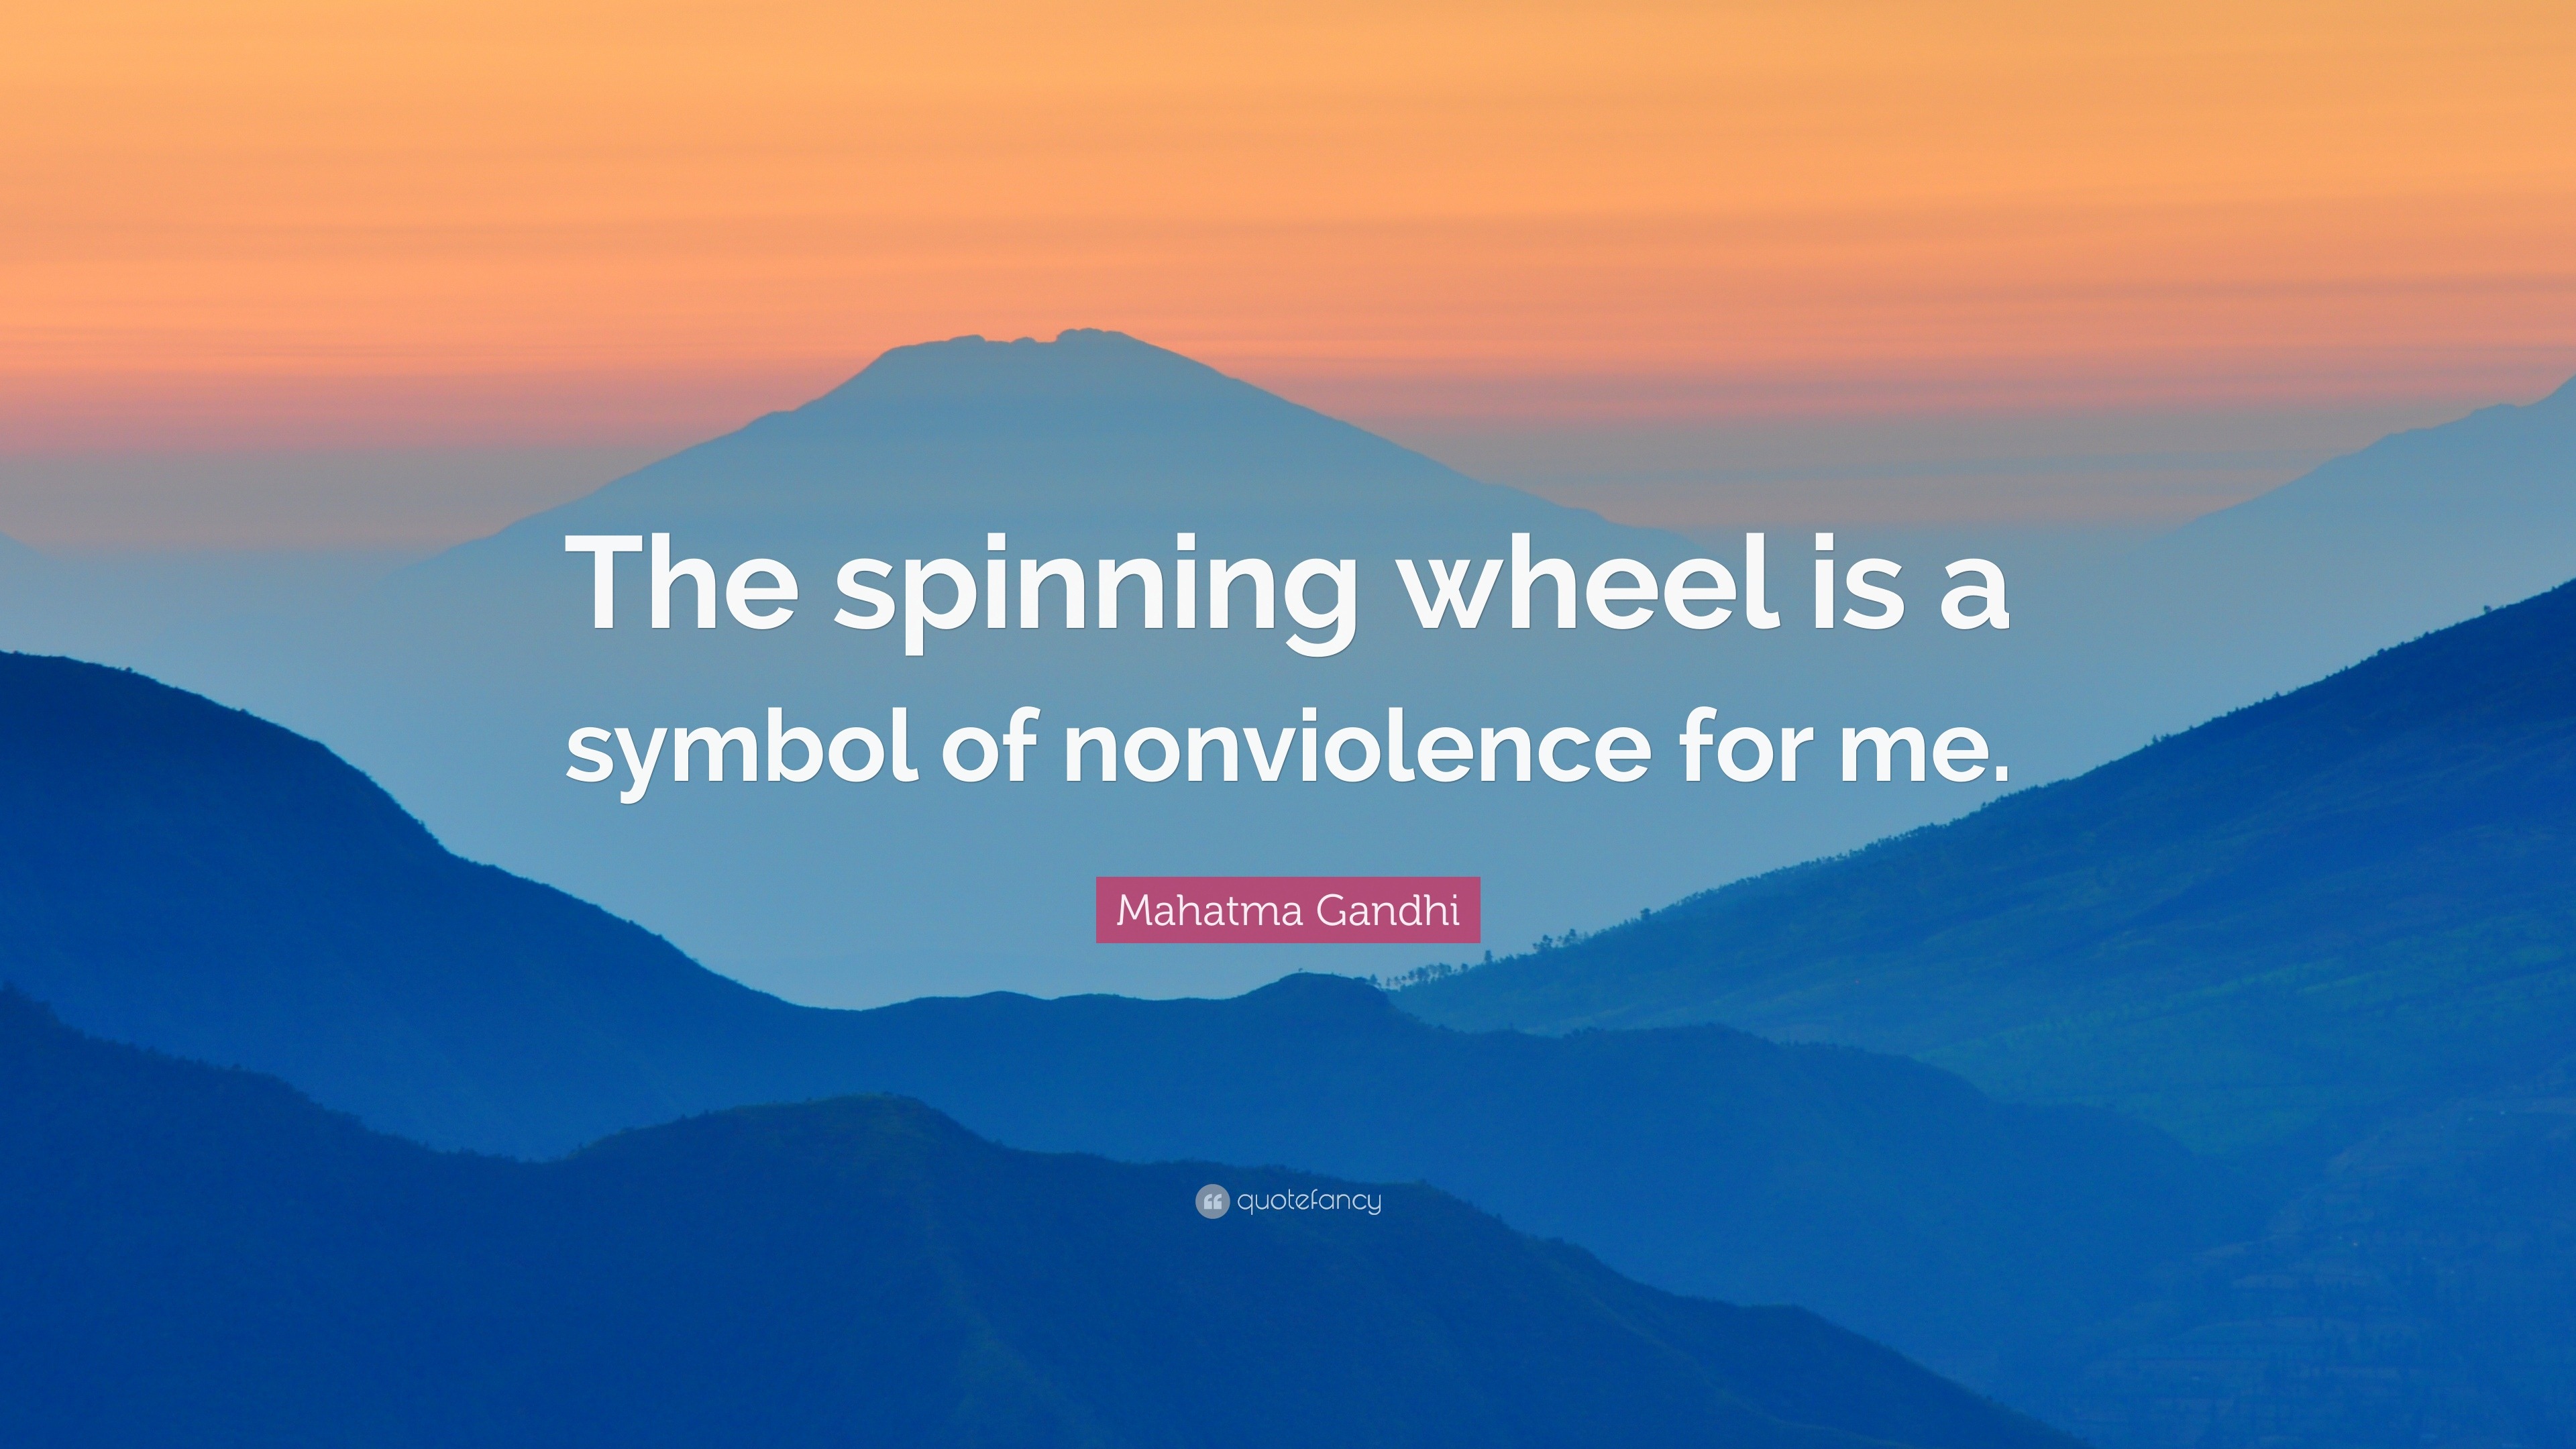 Mahatma Gandhi Quote: “The spinning wheel is a symbol of nonviolence